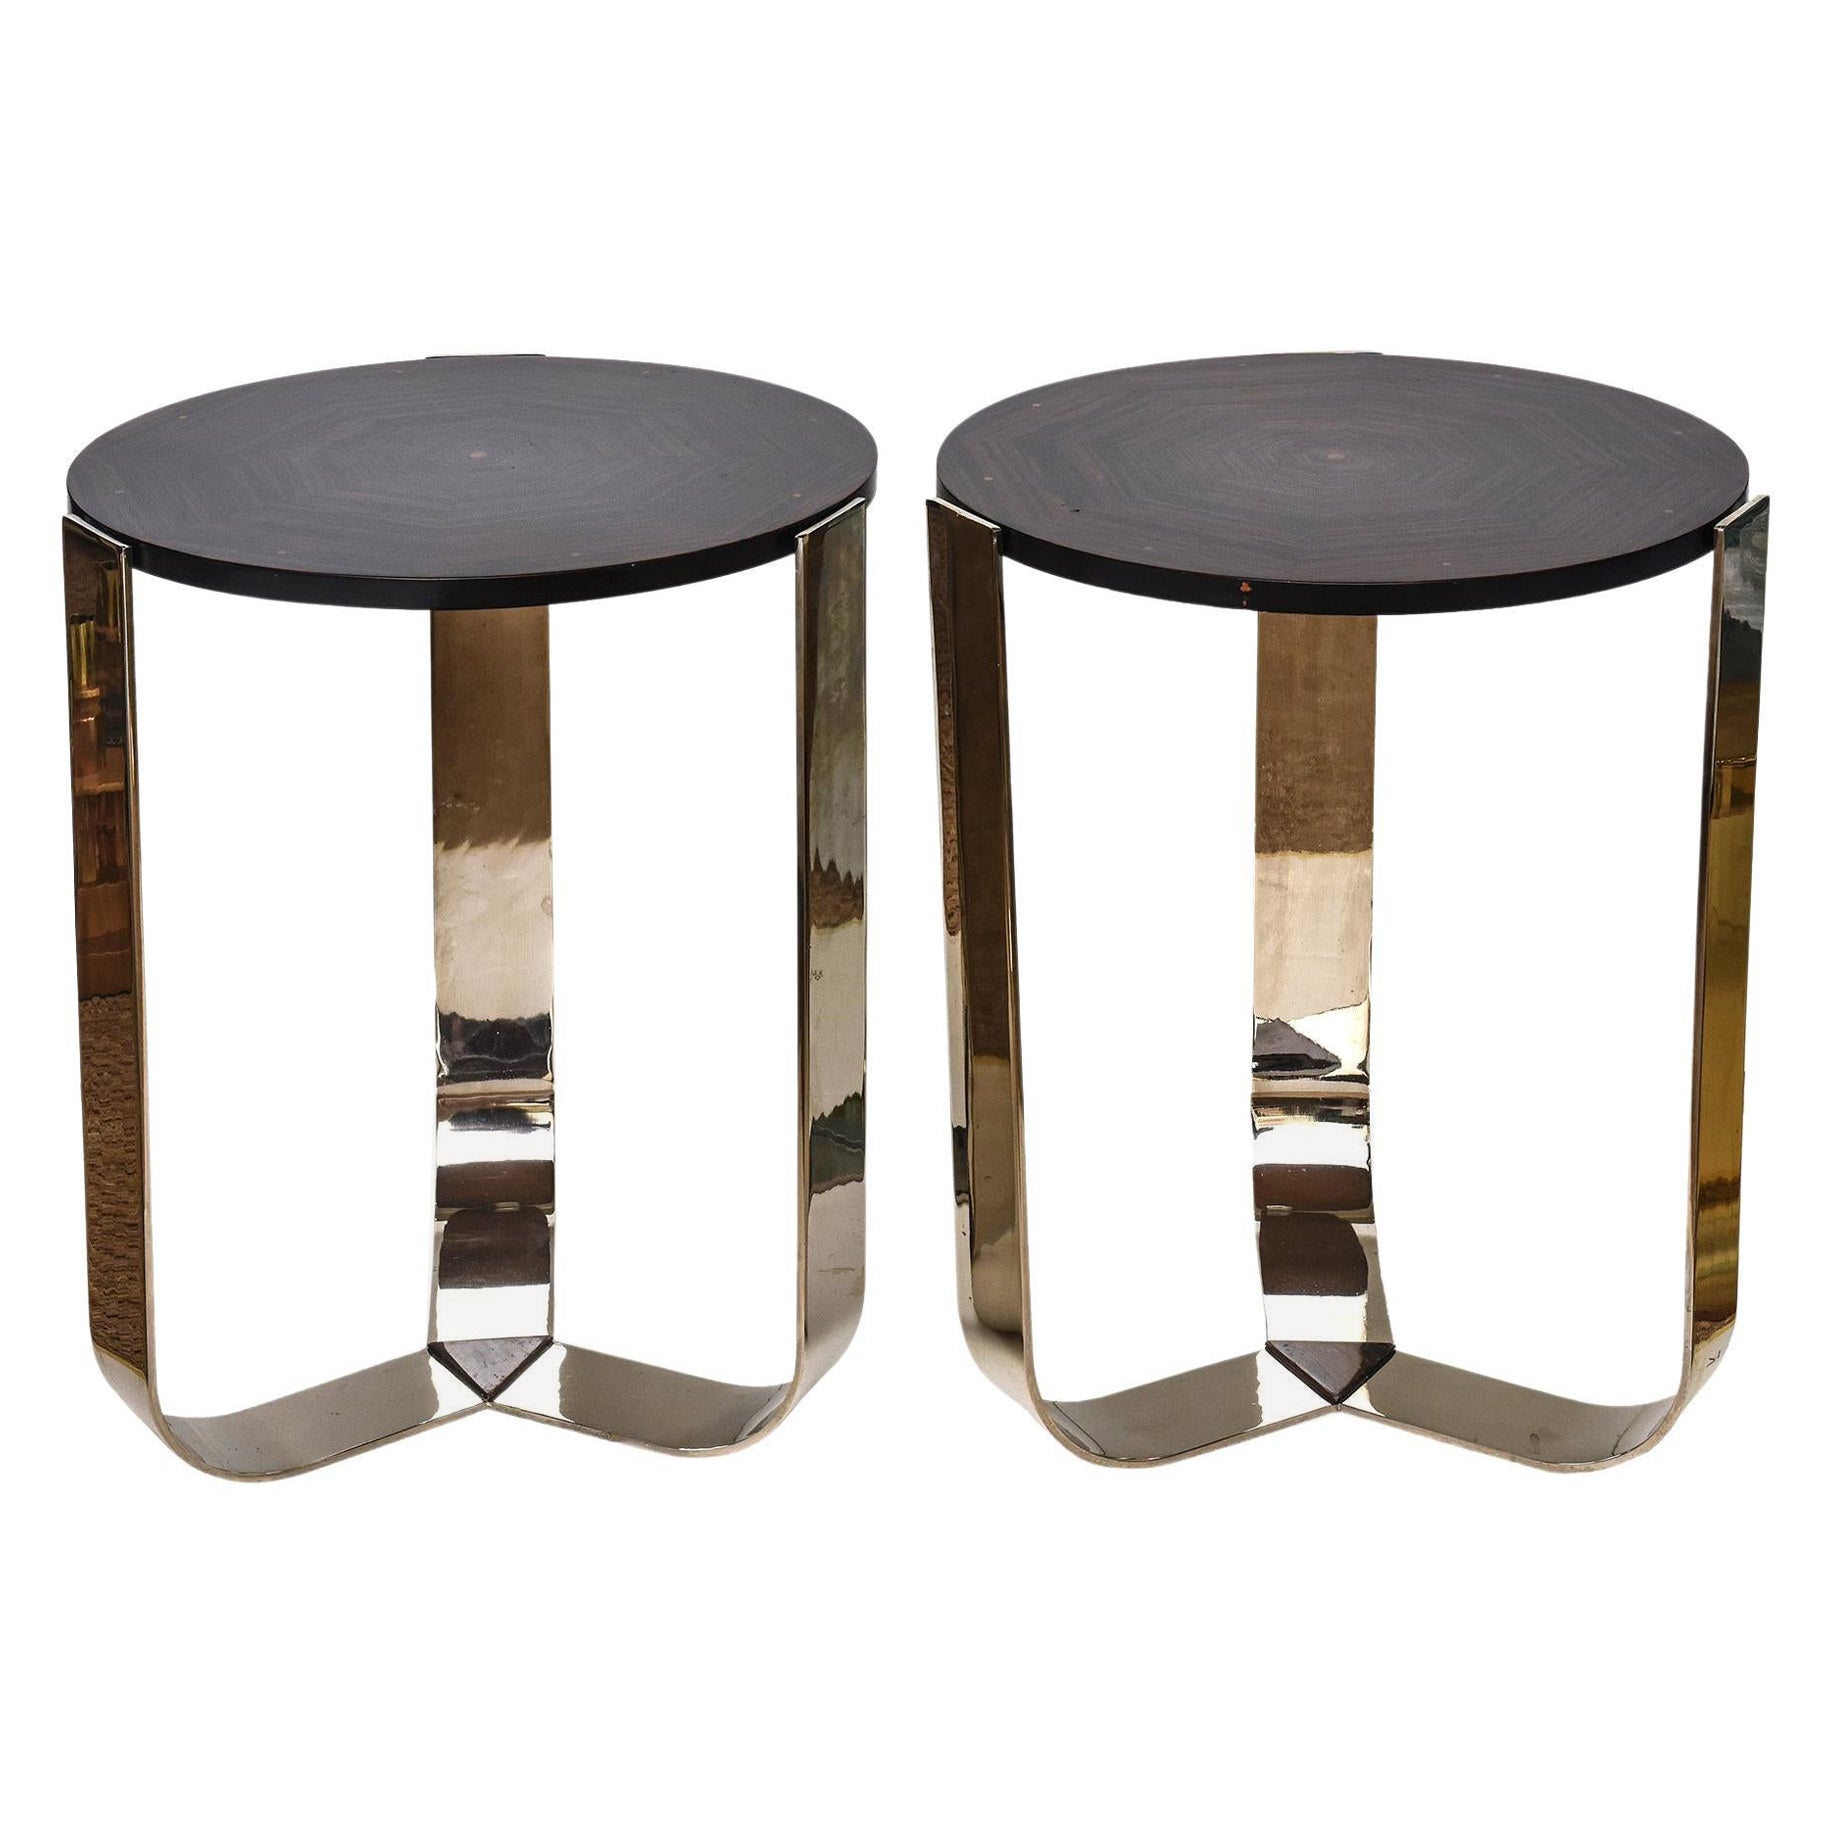 Rosewood, Wood and Chrome Plated Stainless Steel Side Table Deco Style Pair